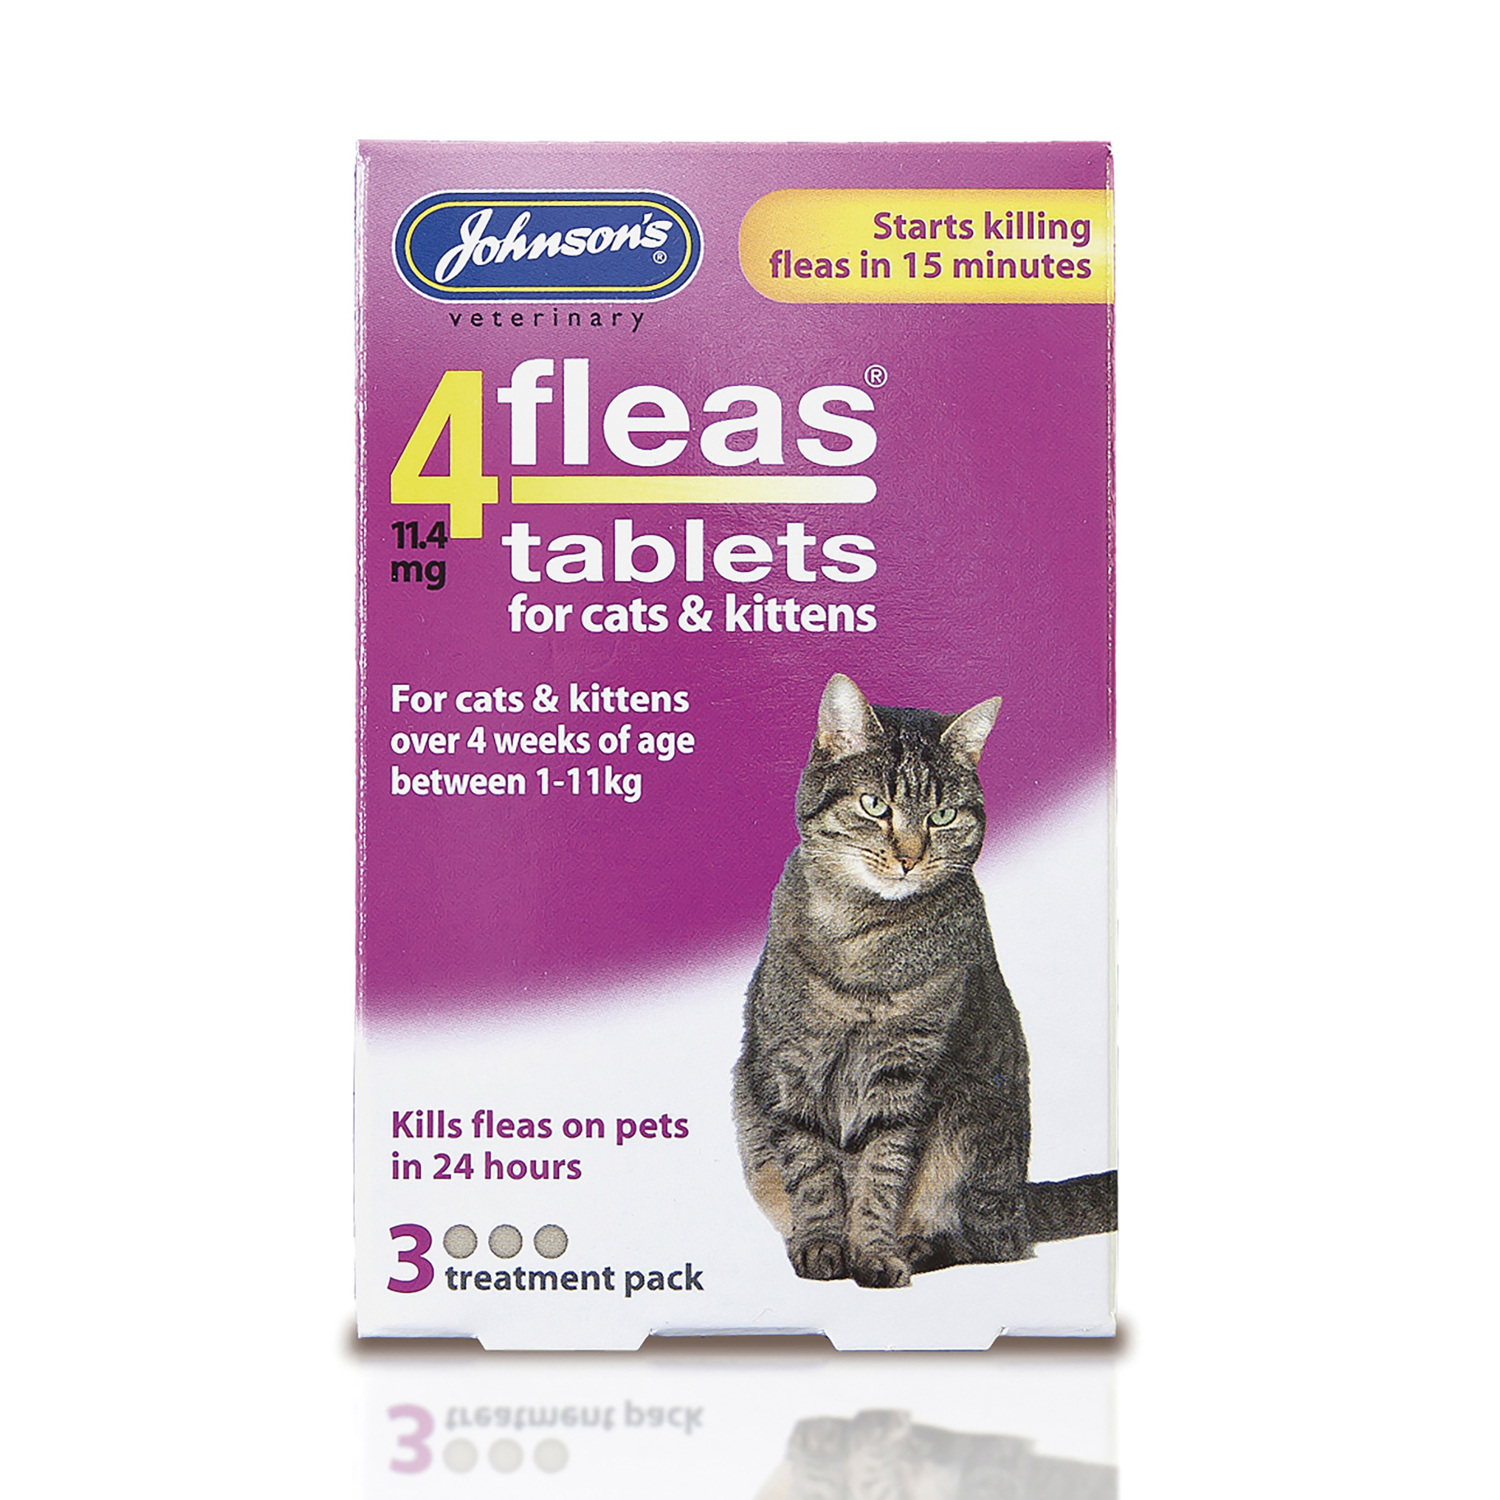 Johnson's Veterinary Cats and Kittens 4 Fleas Control Tablets 3 Pack Image